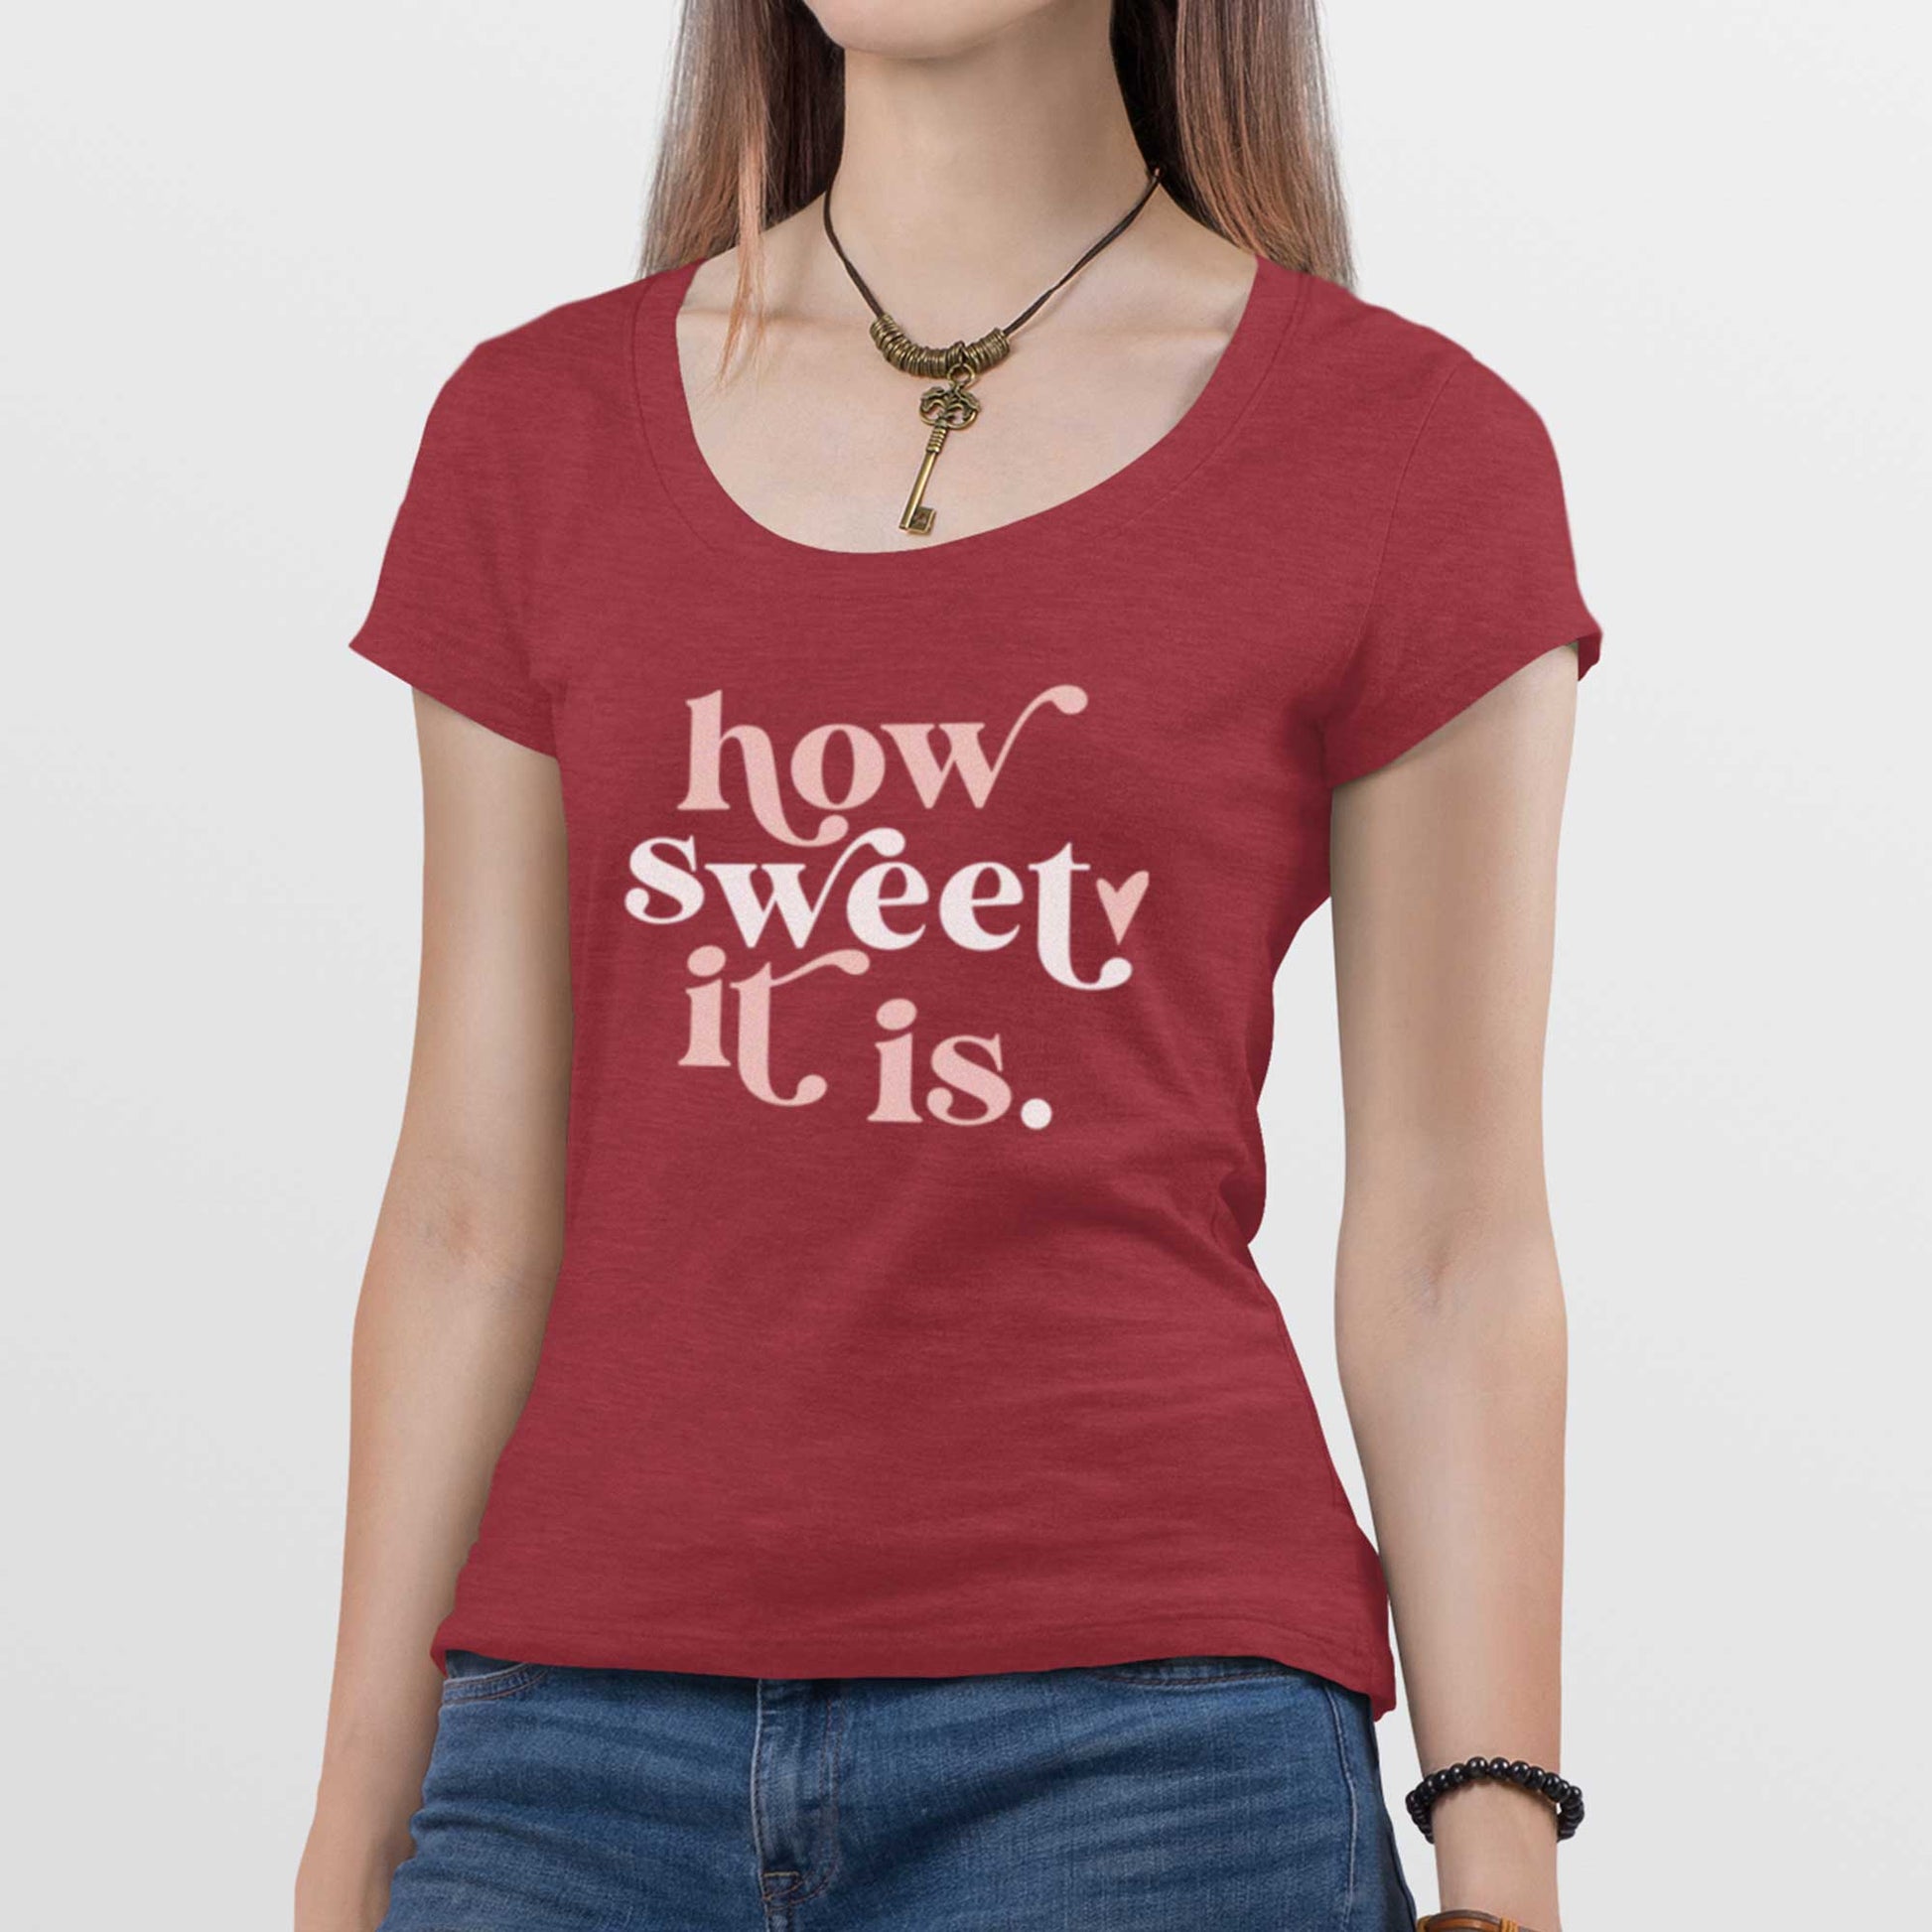 A woman wearing a heathered red District scoop t-shirt featuring the words how sweet it is.